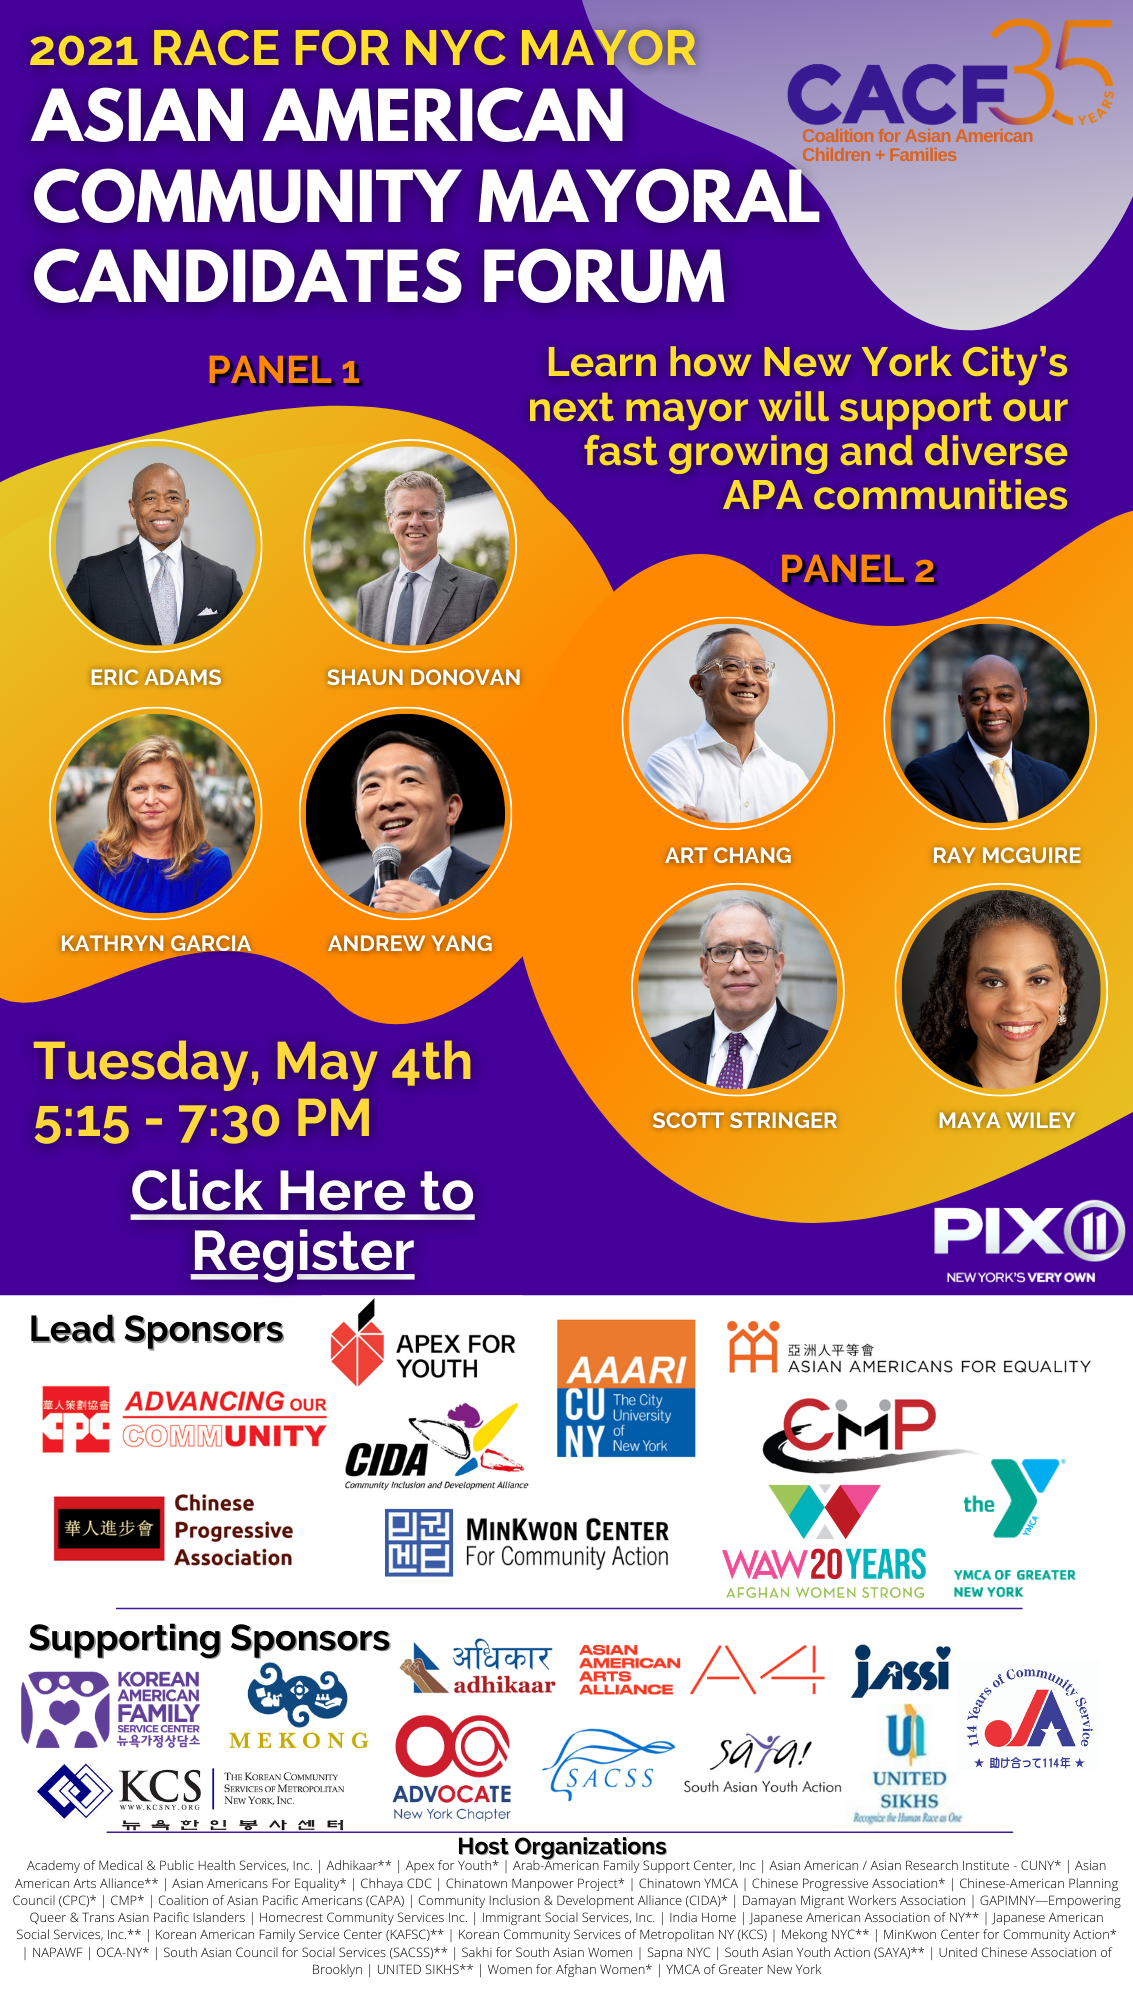 Asian American Community Mayoral Candidates Forum